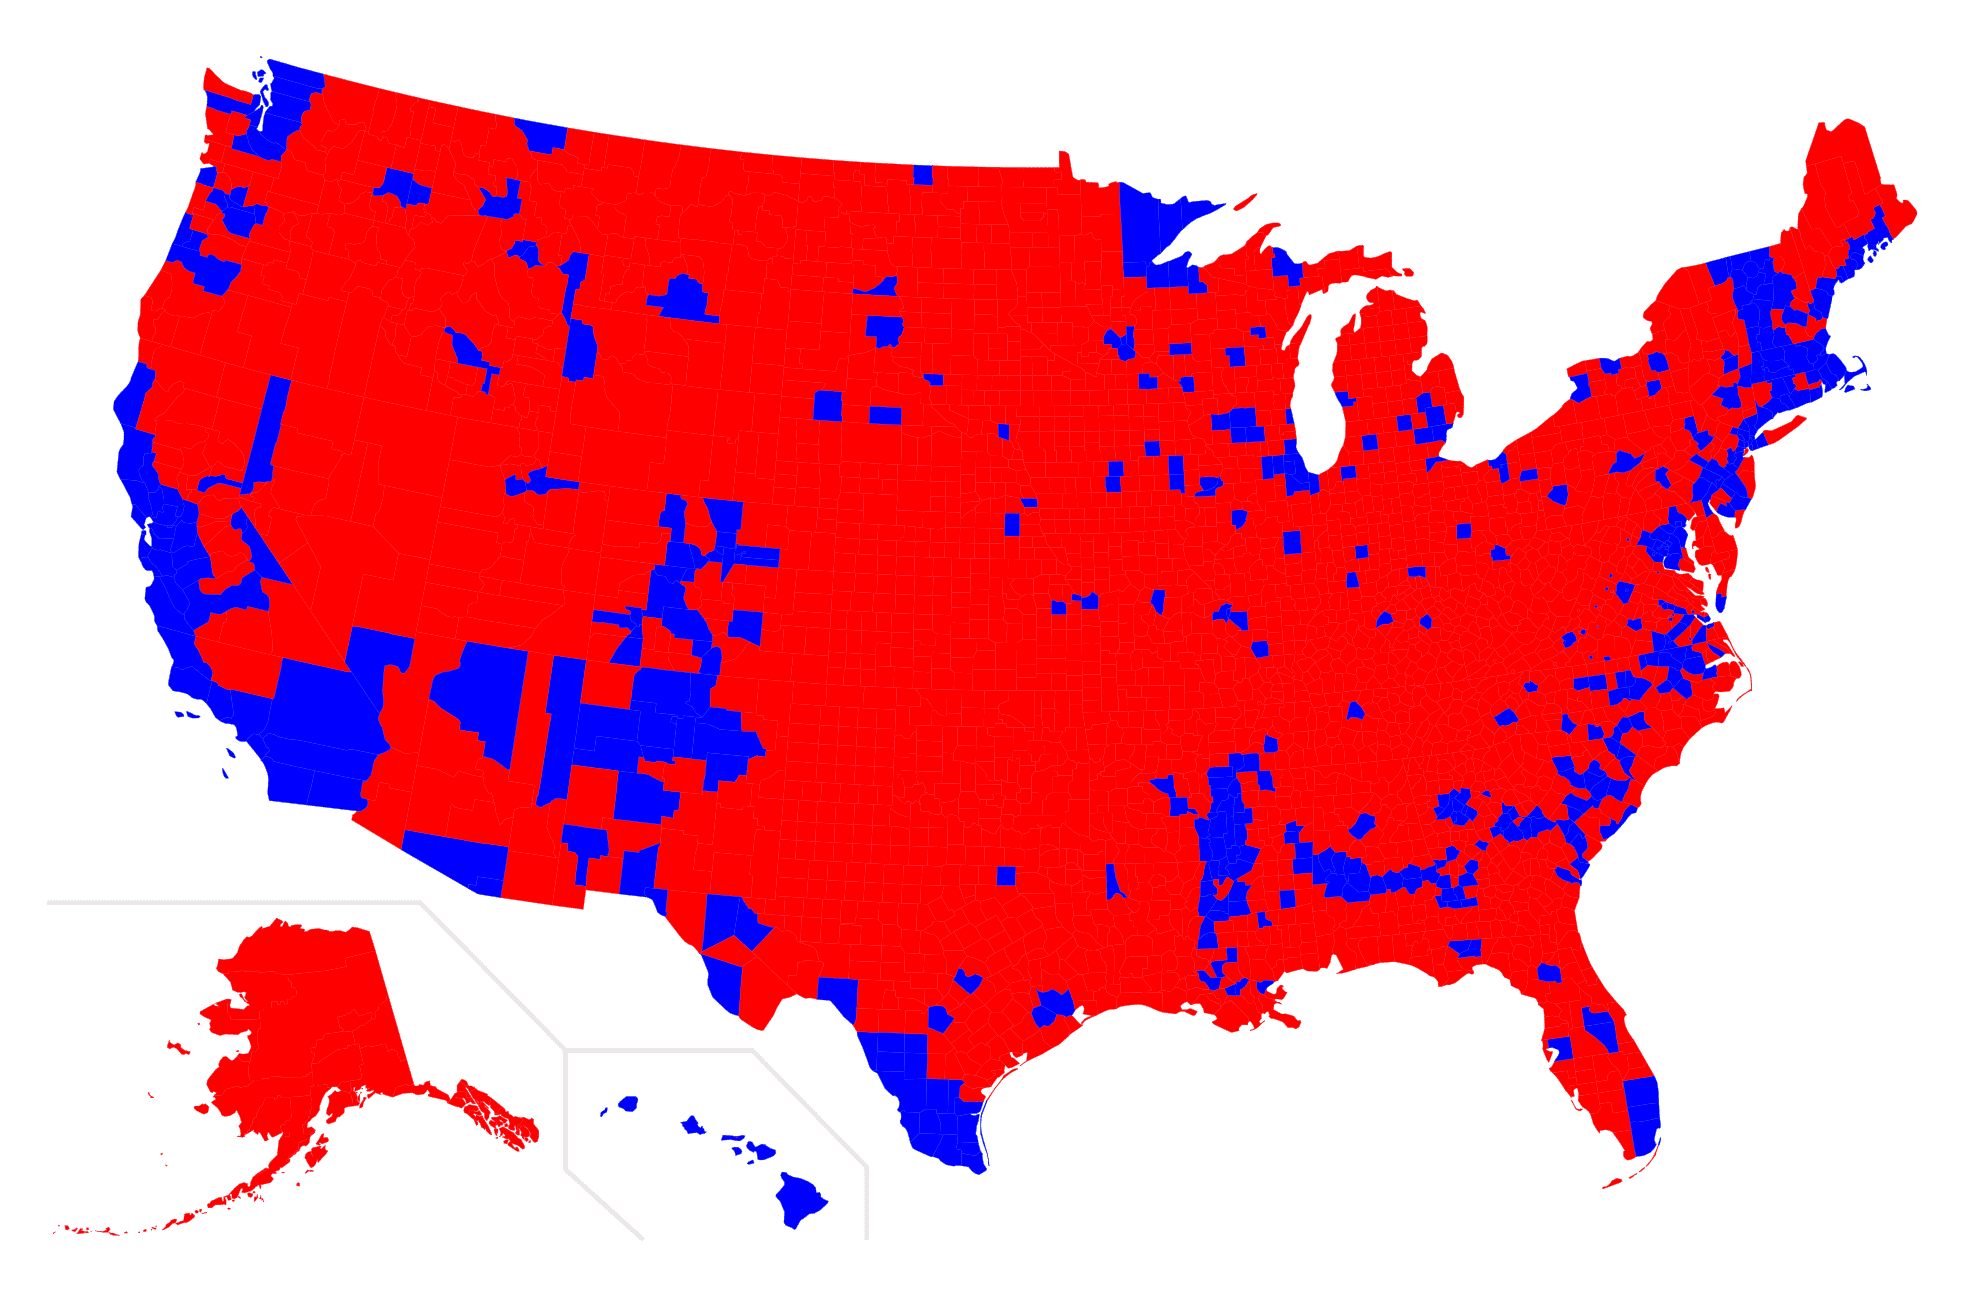 The 2016 County-Level Winner-Takes-All map. We see a county-level map of the United States with each county either red or blue. The vast majority of counties are red.